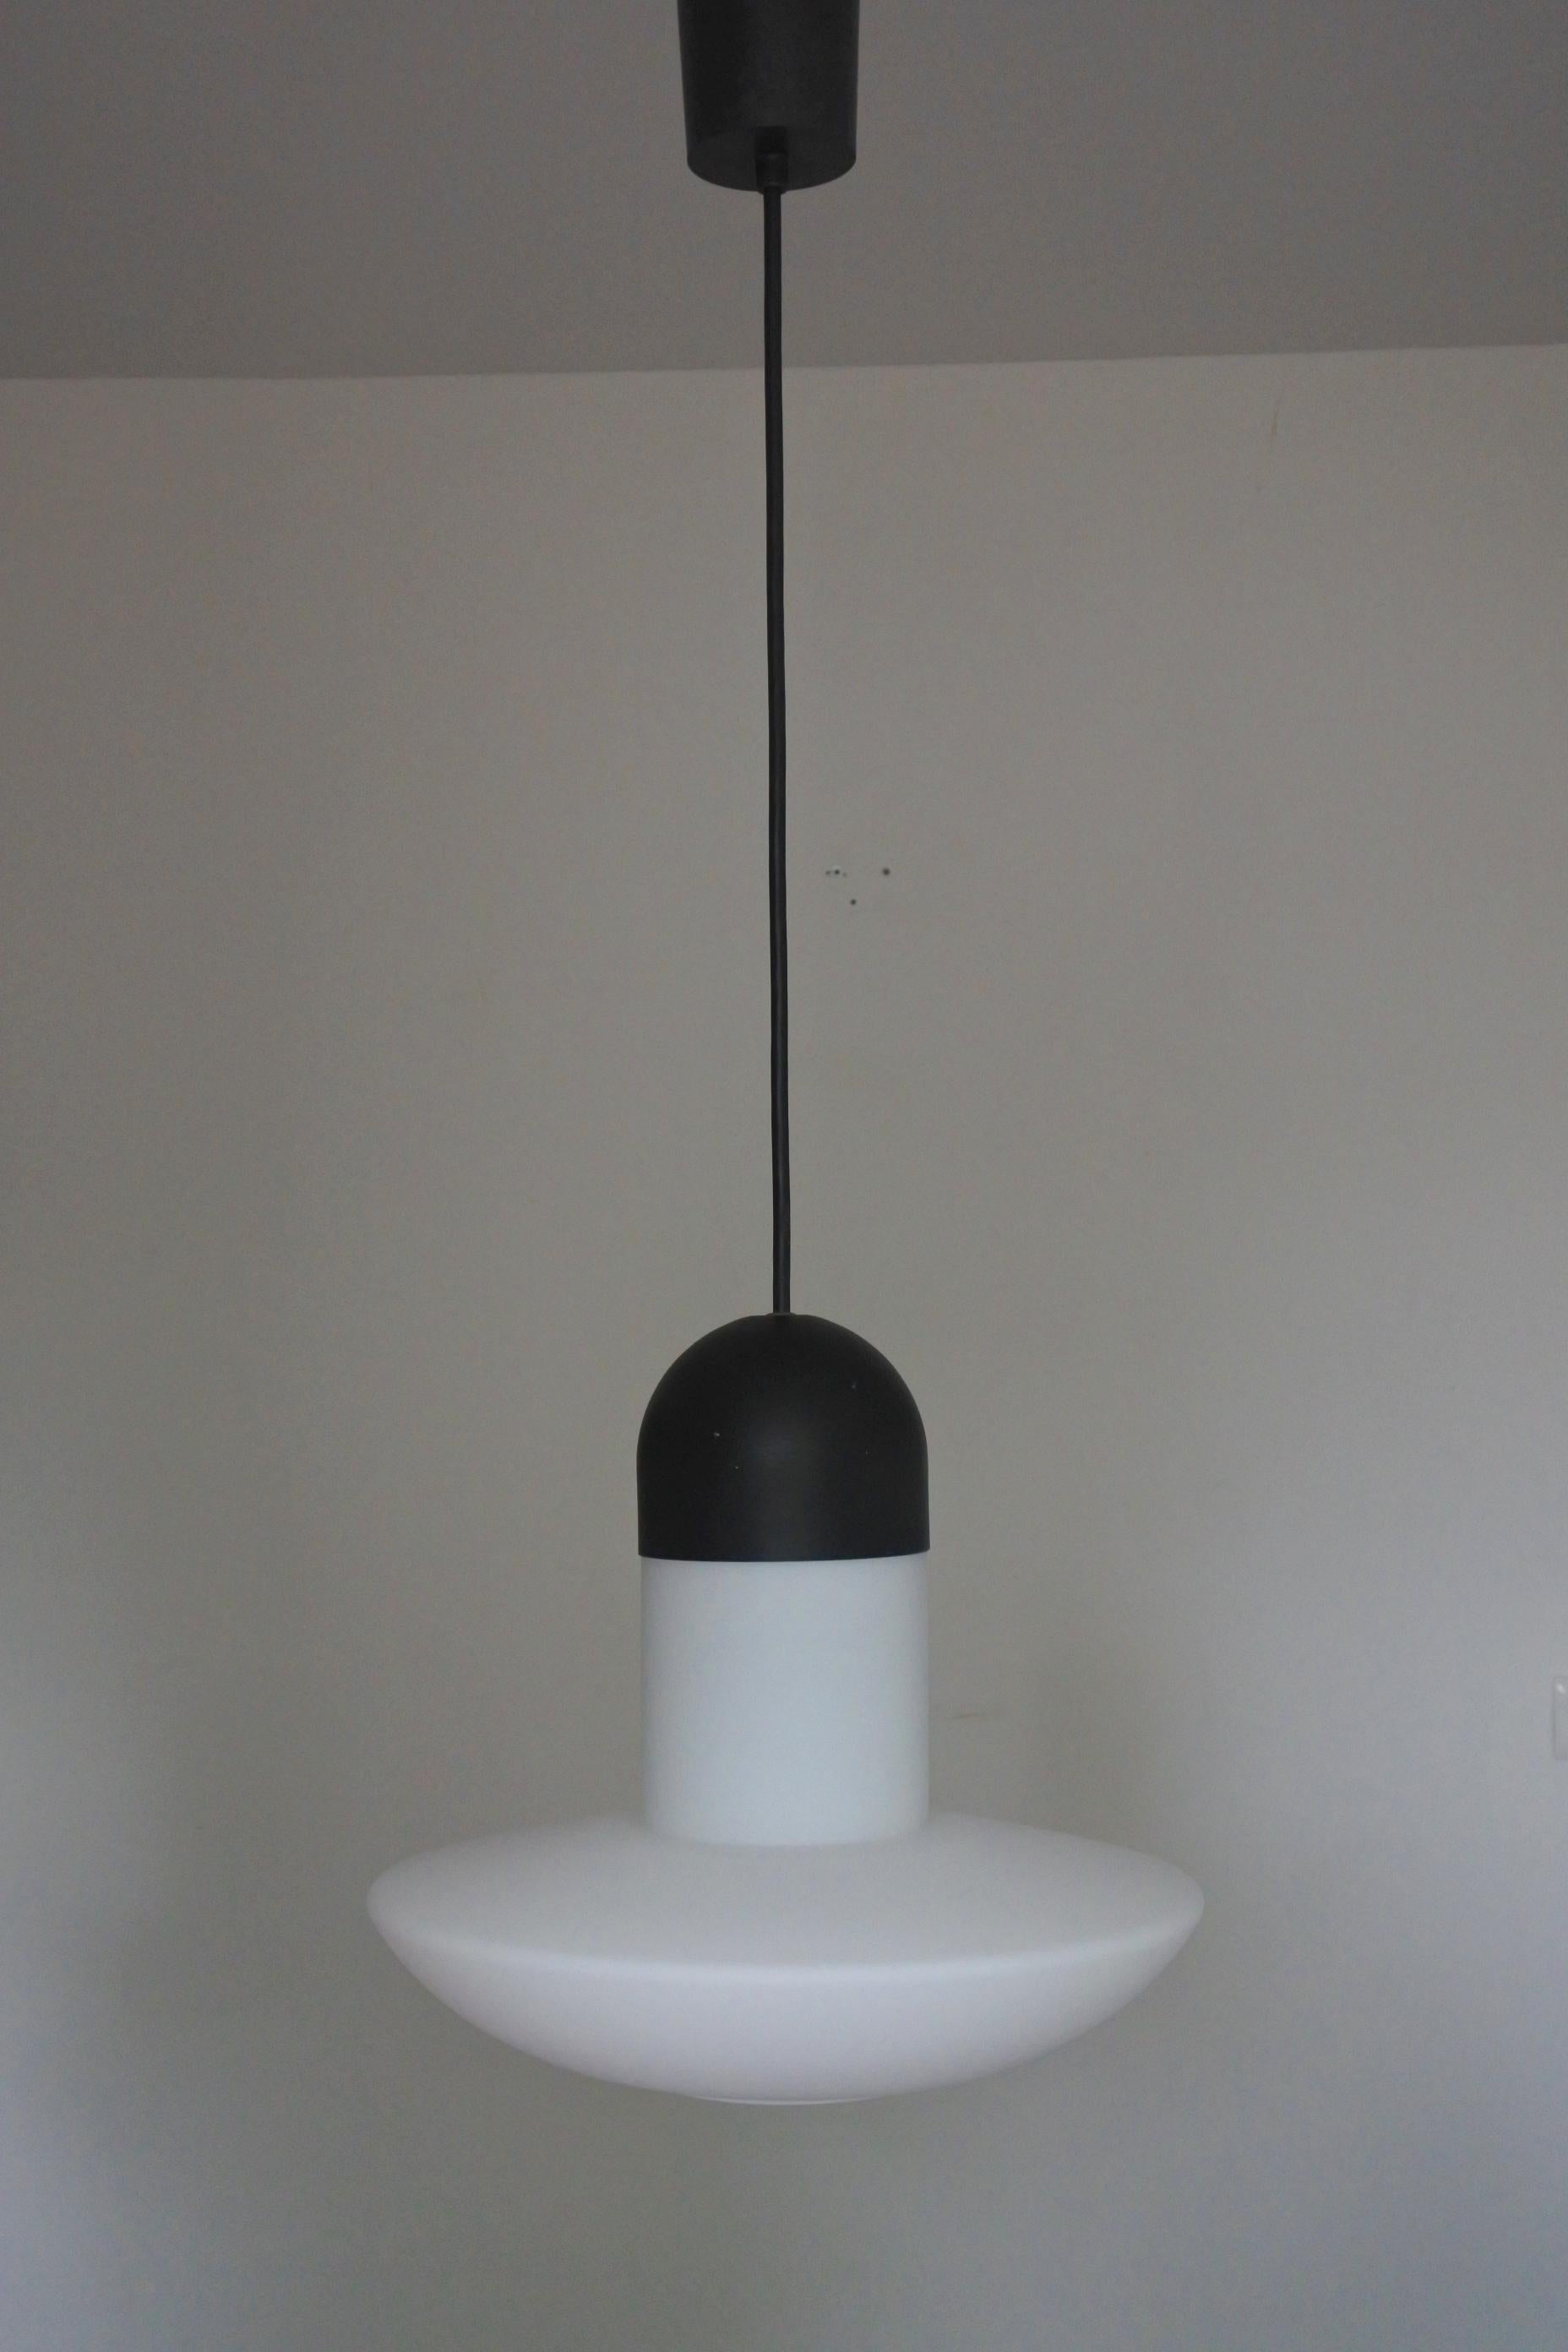 Pendant lamp by German lamp manufacturer Glashütte Limburg.
Black lacquered metal and white opal glass.
3 available.
Works great as a group. Ideal for large spaces and high ceilings.
Adjustable height, as shown 120 cm, the cable can easily be